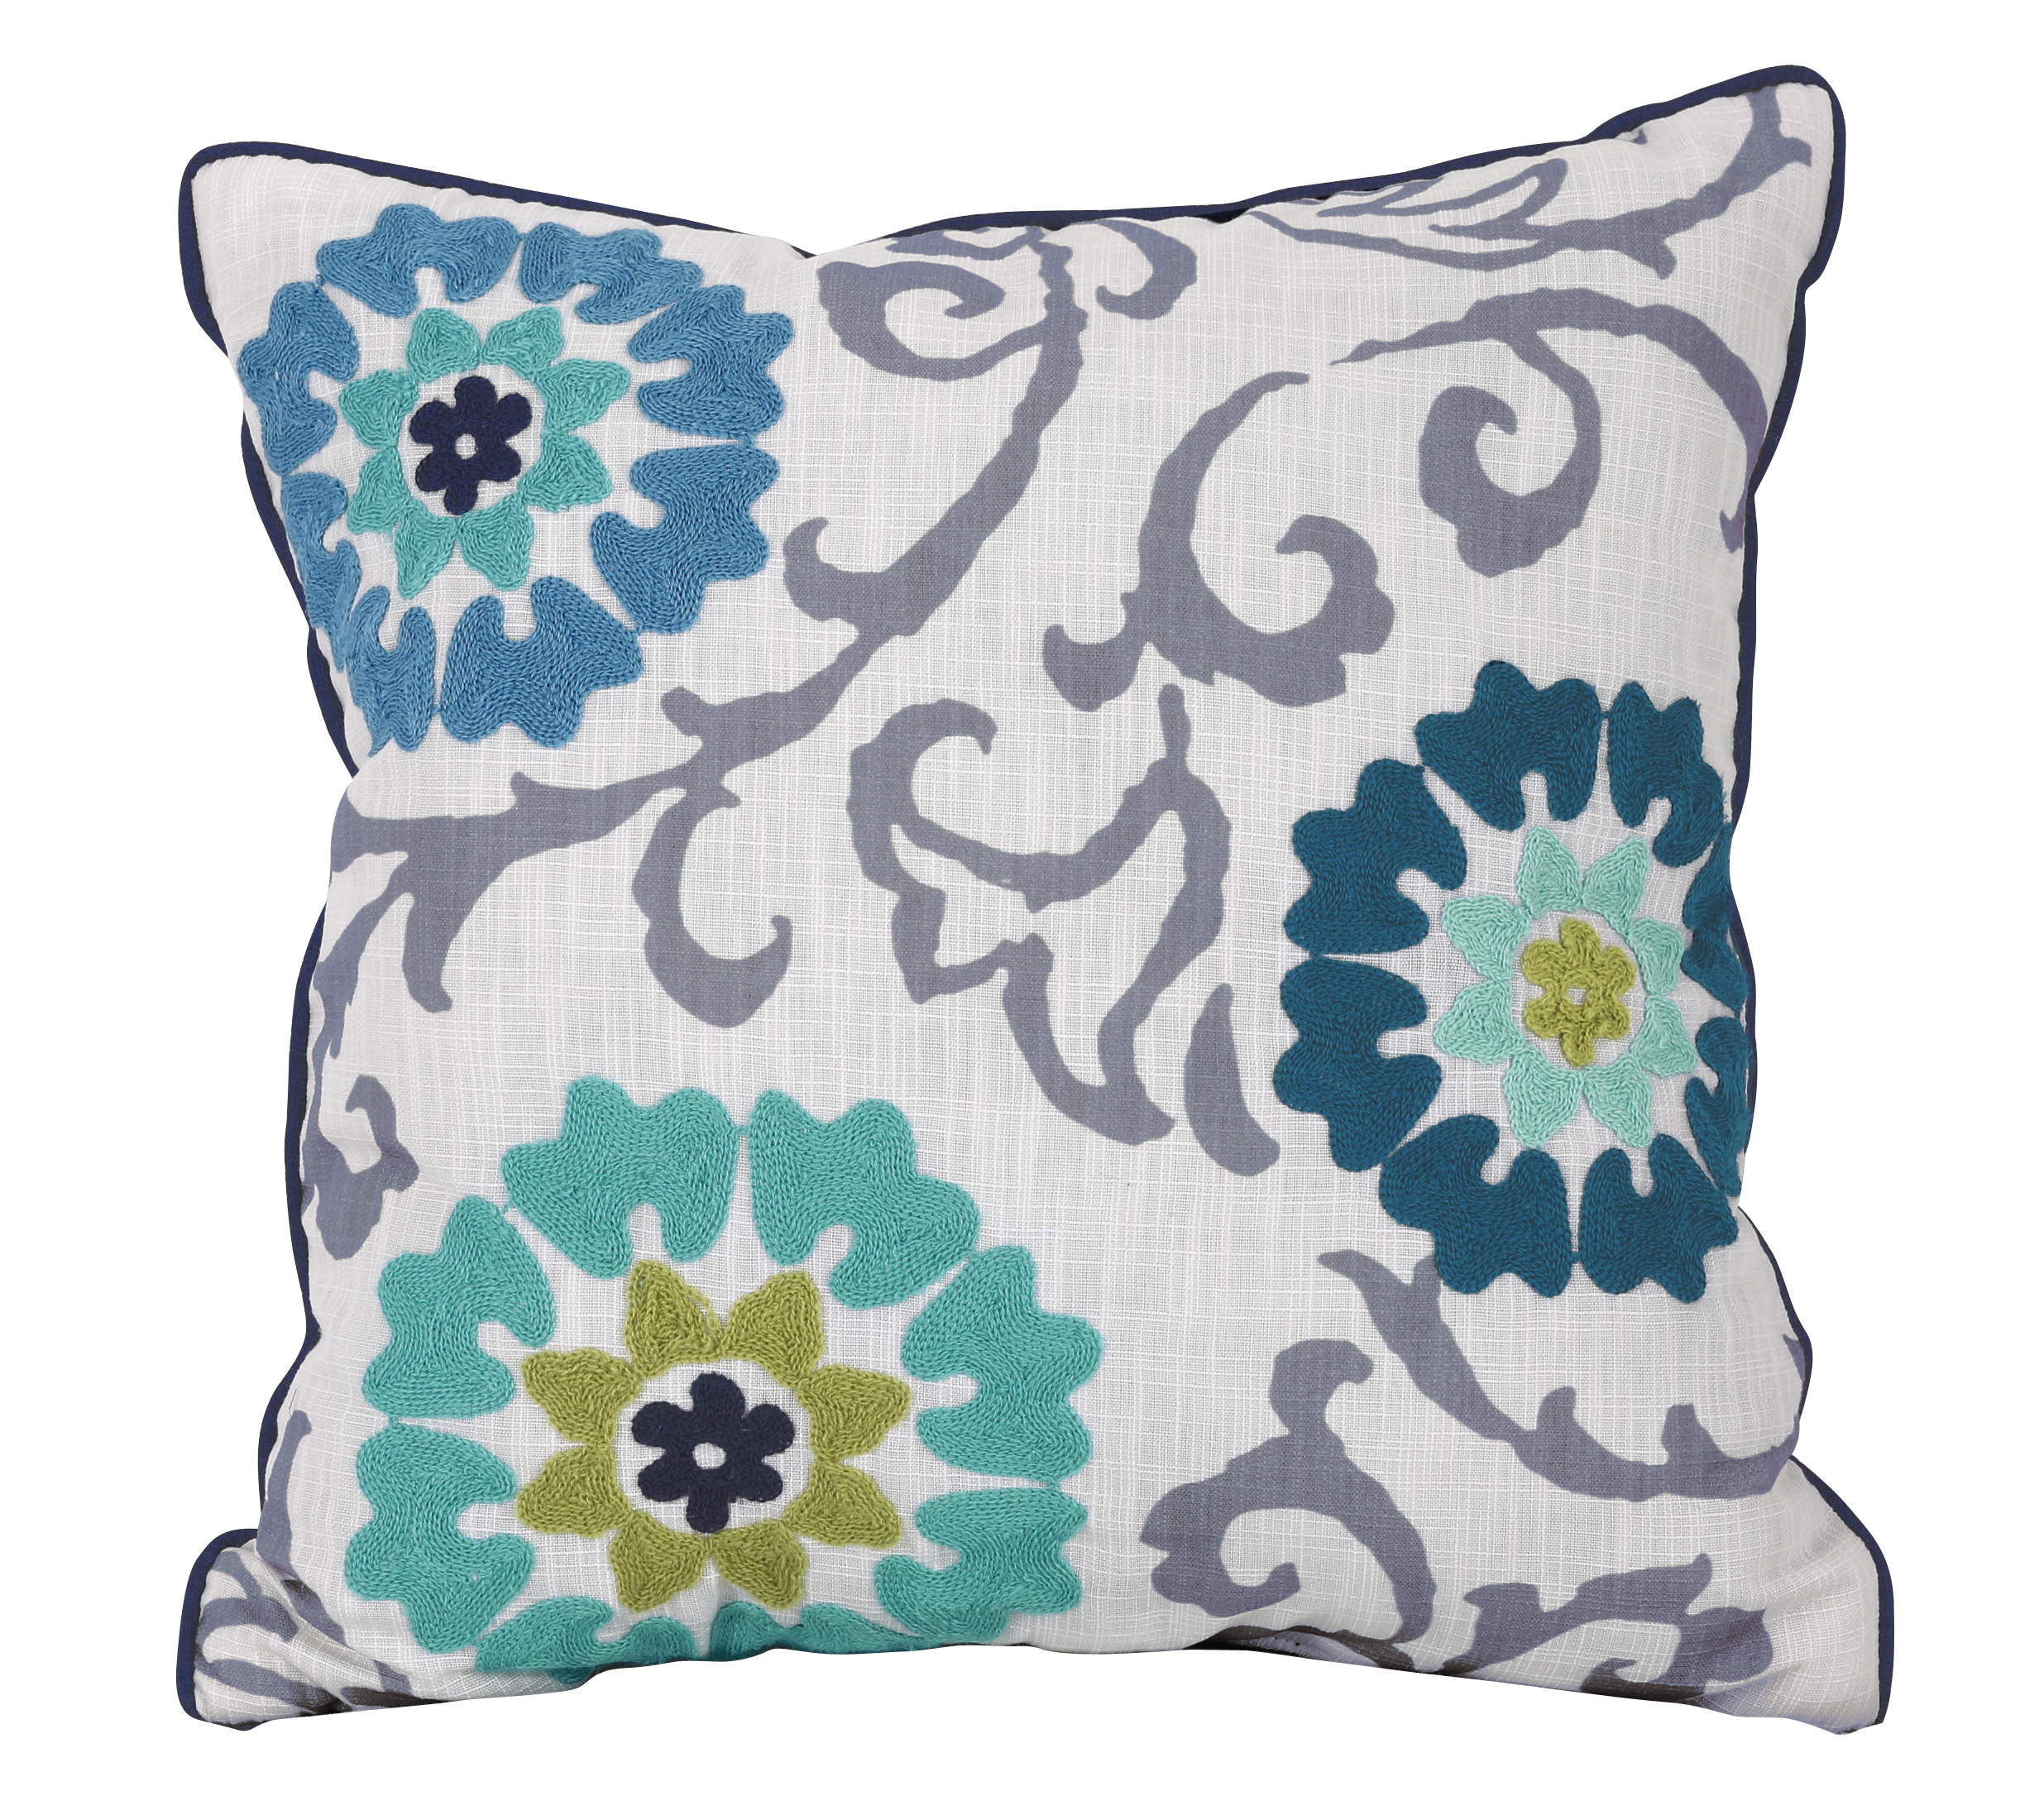 Better Homes & Gardens Floral Medallion Decorative Throw Pillow, Gray and Blue - image 1 of 2